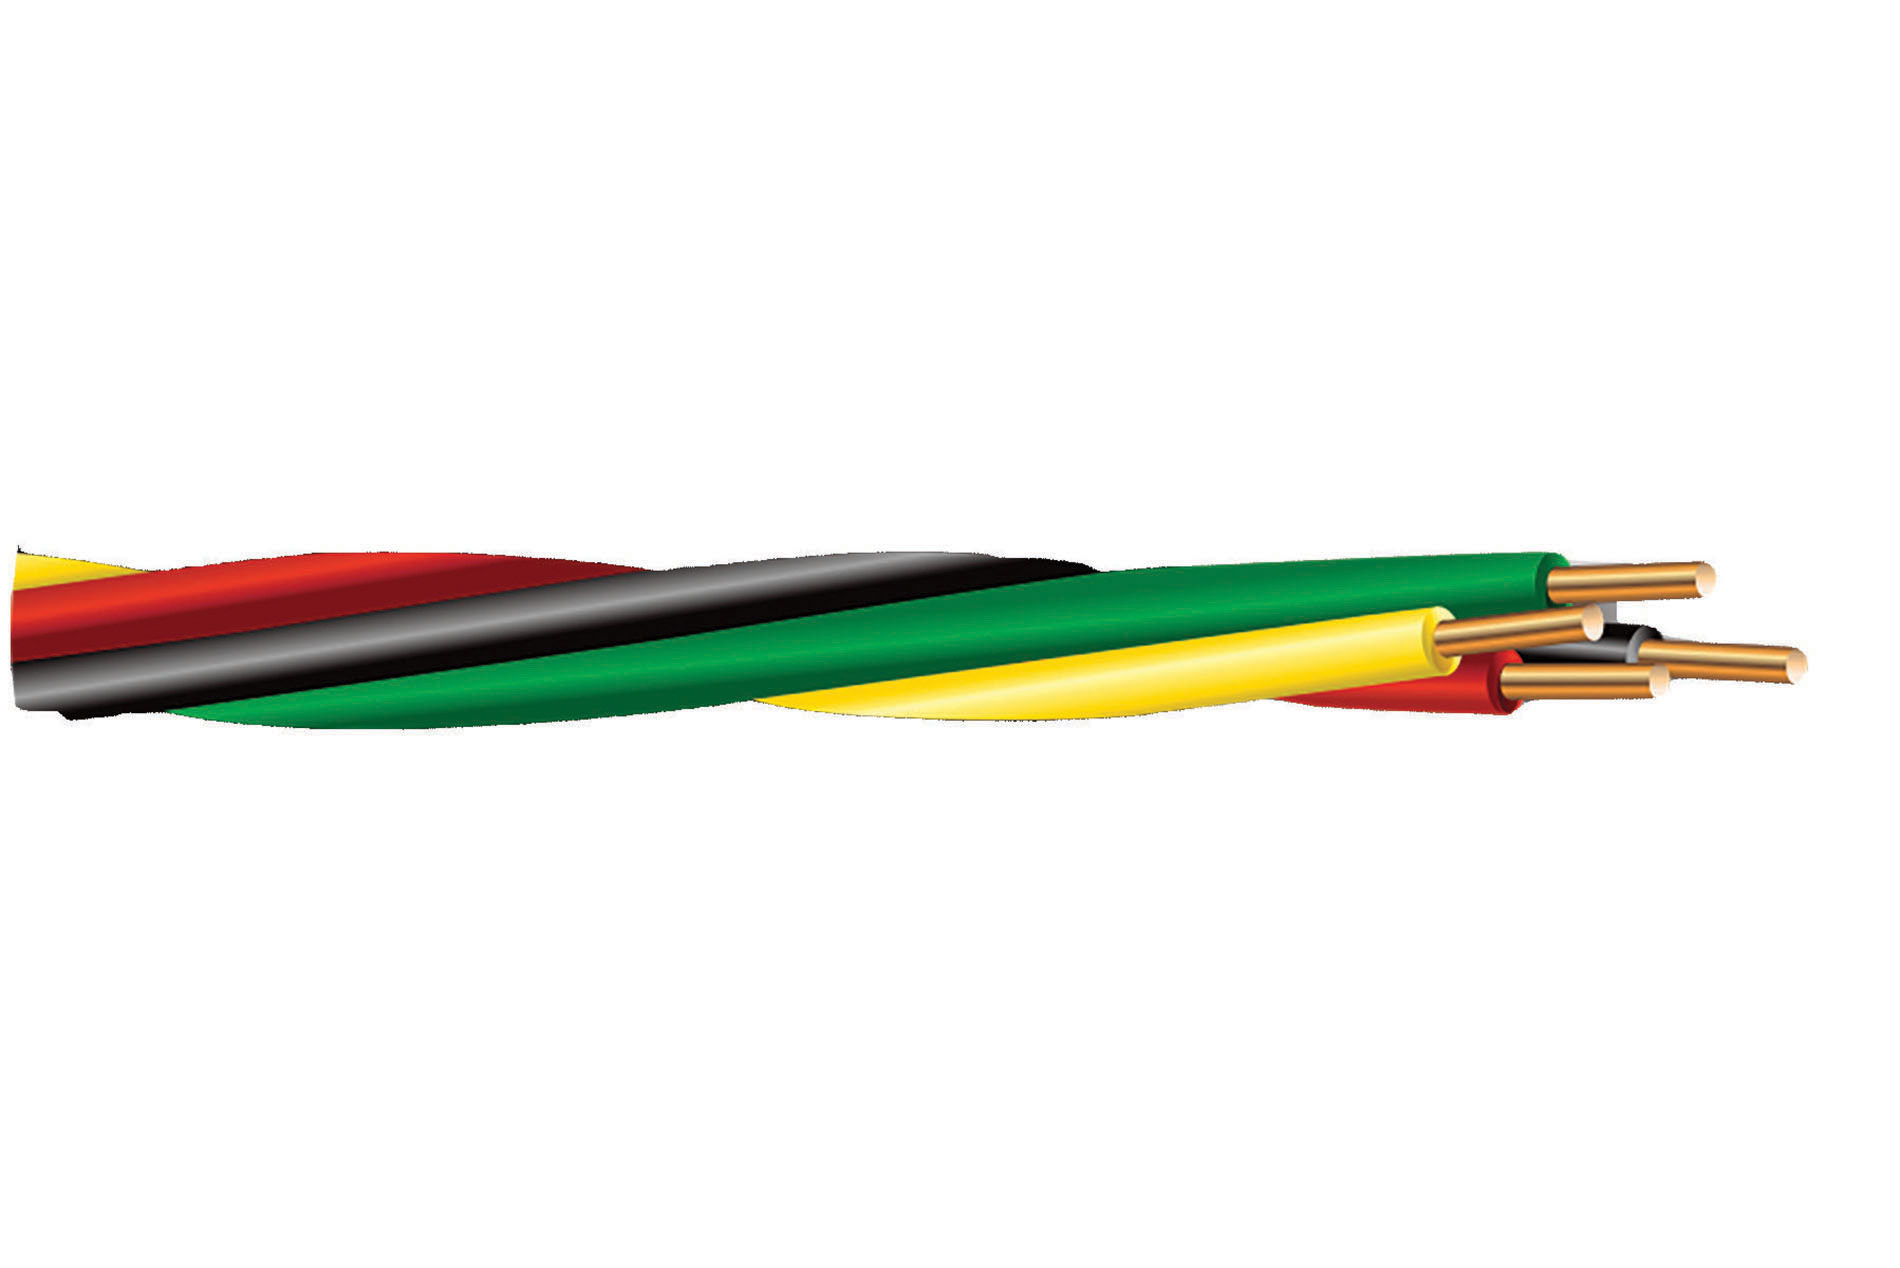 Black, green, red and yellow cables. Image by Cerrowire.